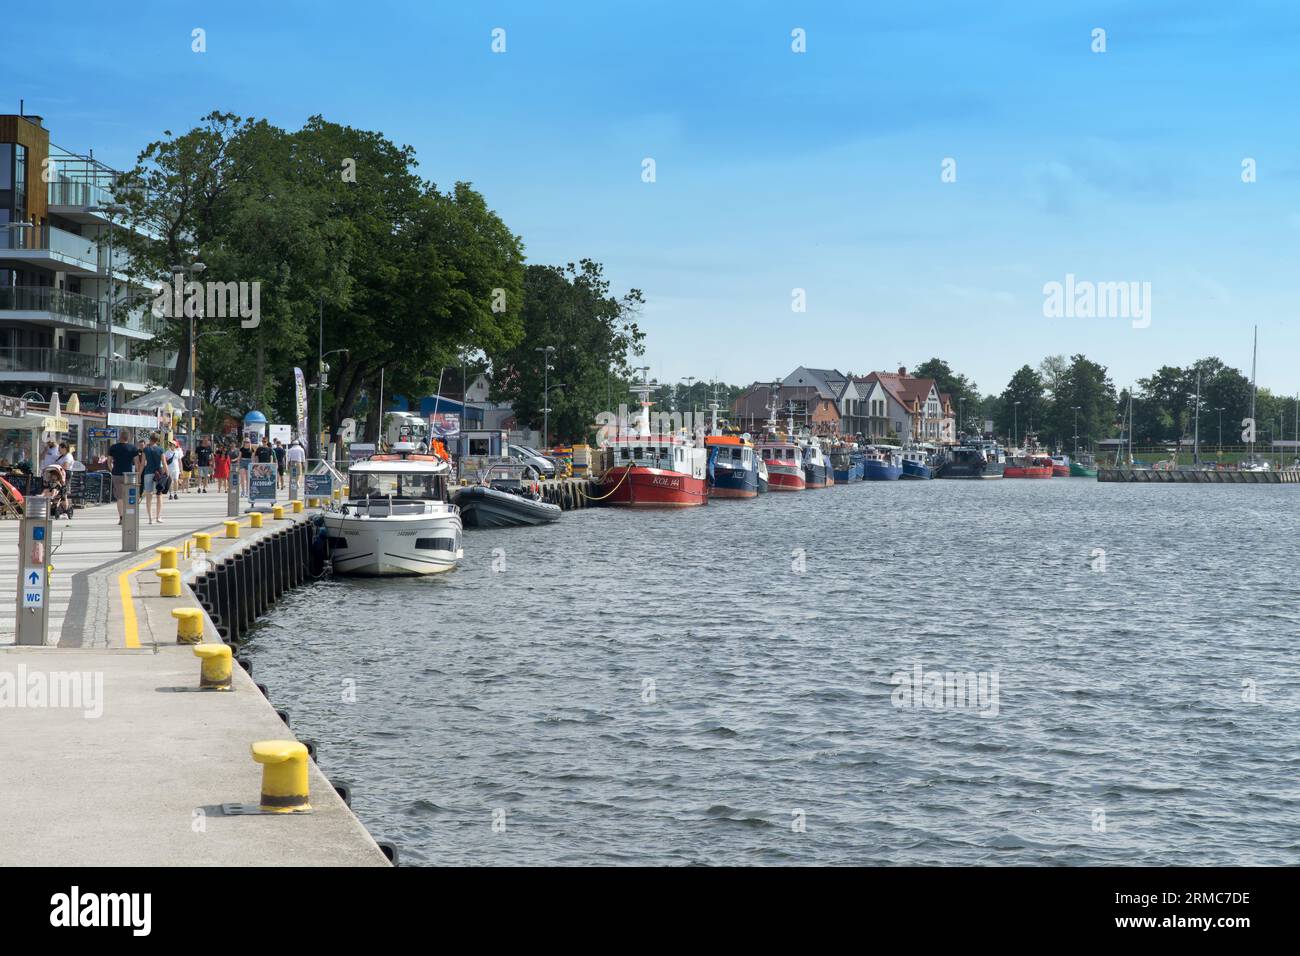 Fishing boats moored in the port of Mrzezyno, Western Pomerania, Poland, Europe. Fishery in the Baltic Sea. Stock Photo